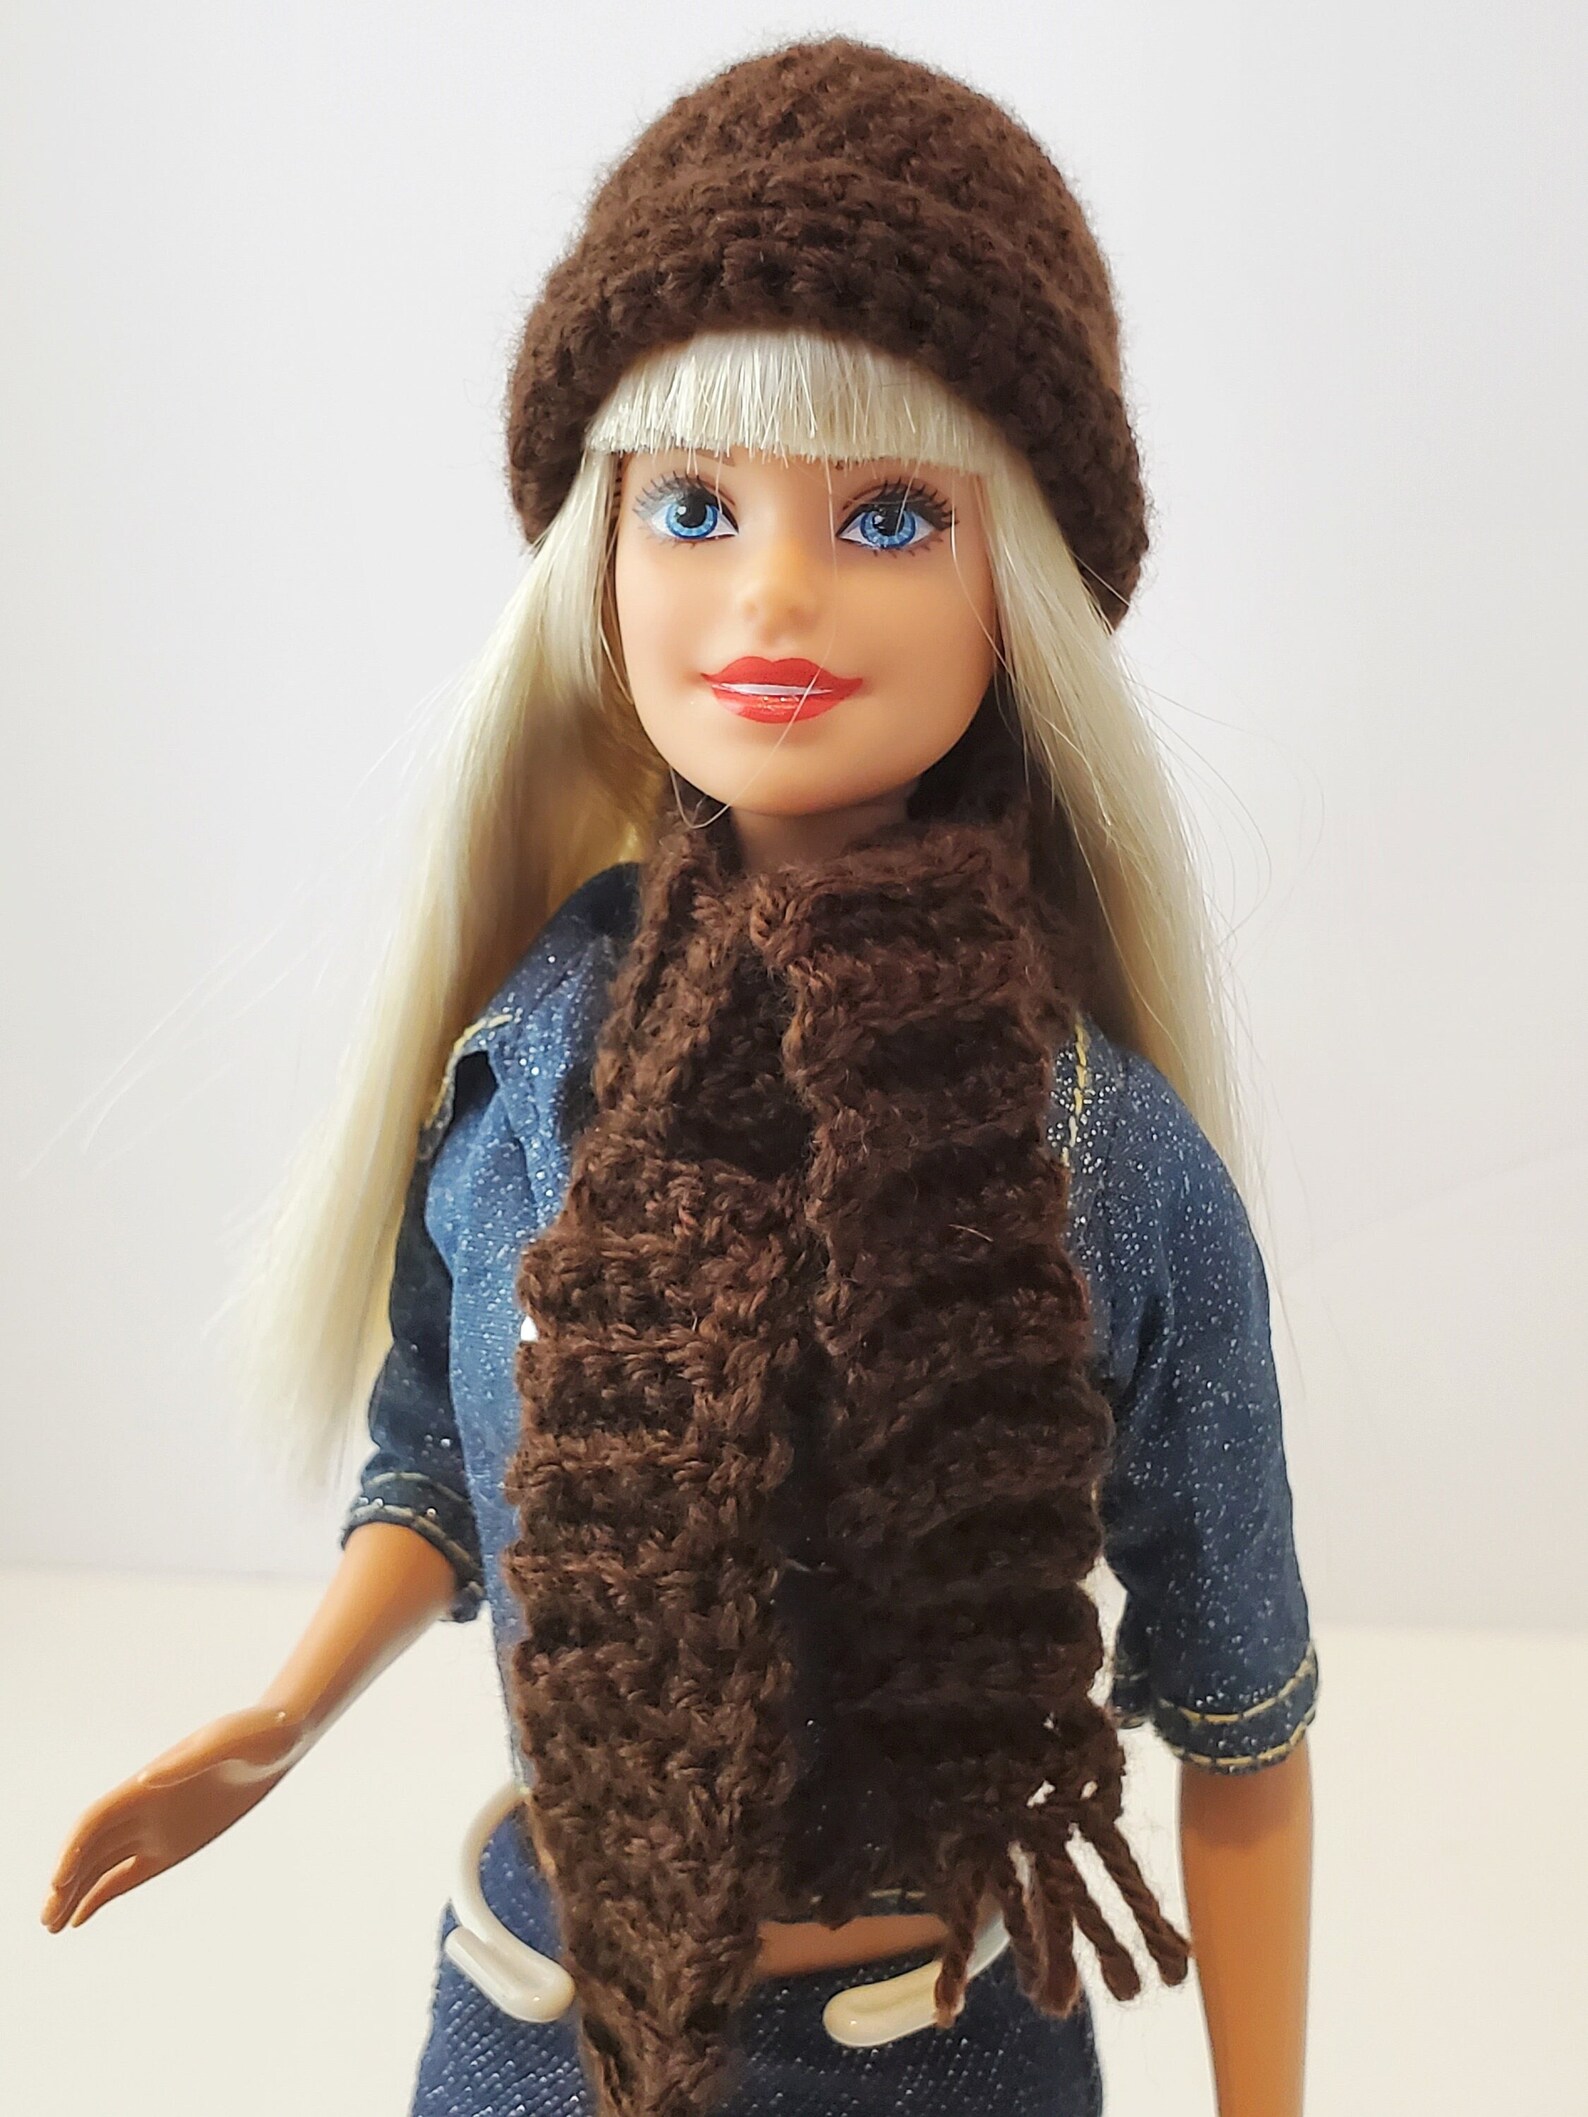 Crocheted hat and scarf on doll